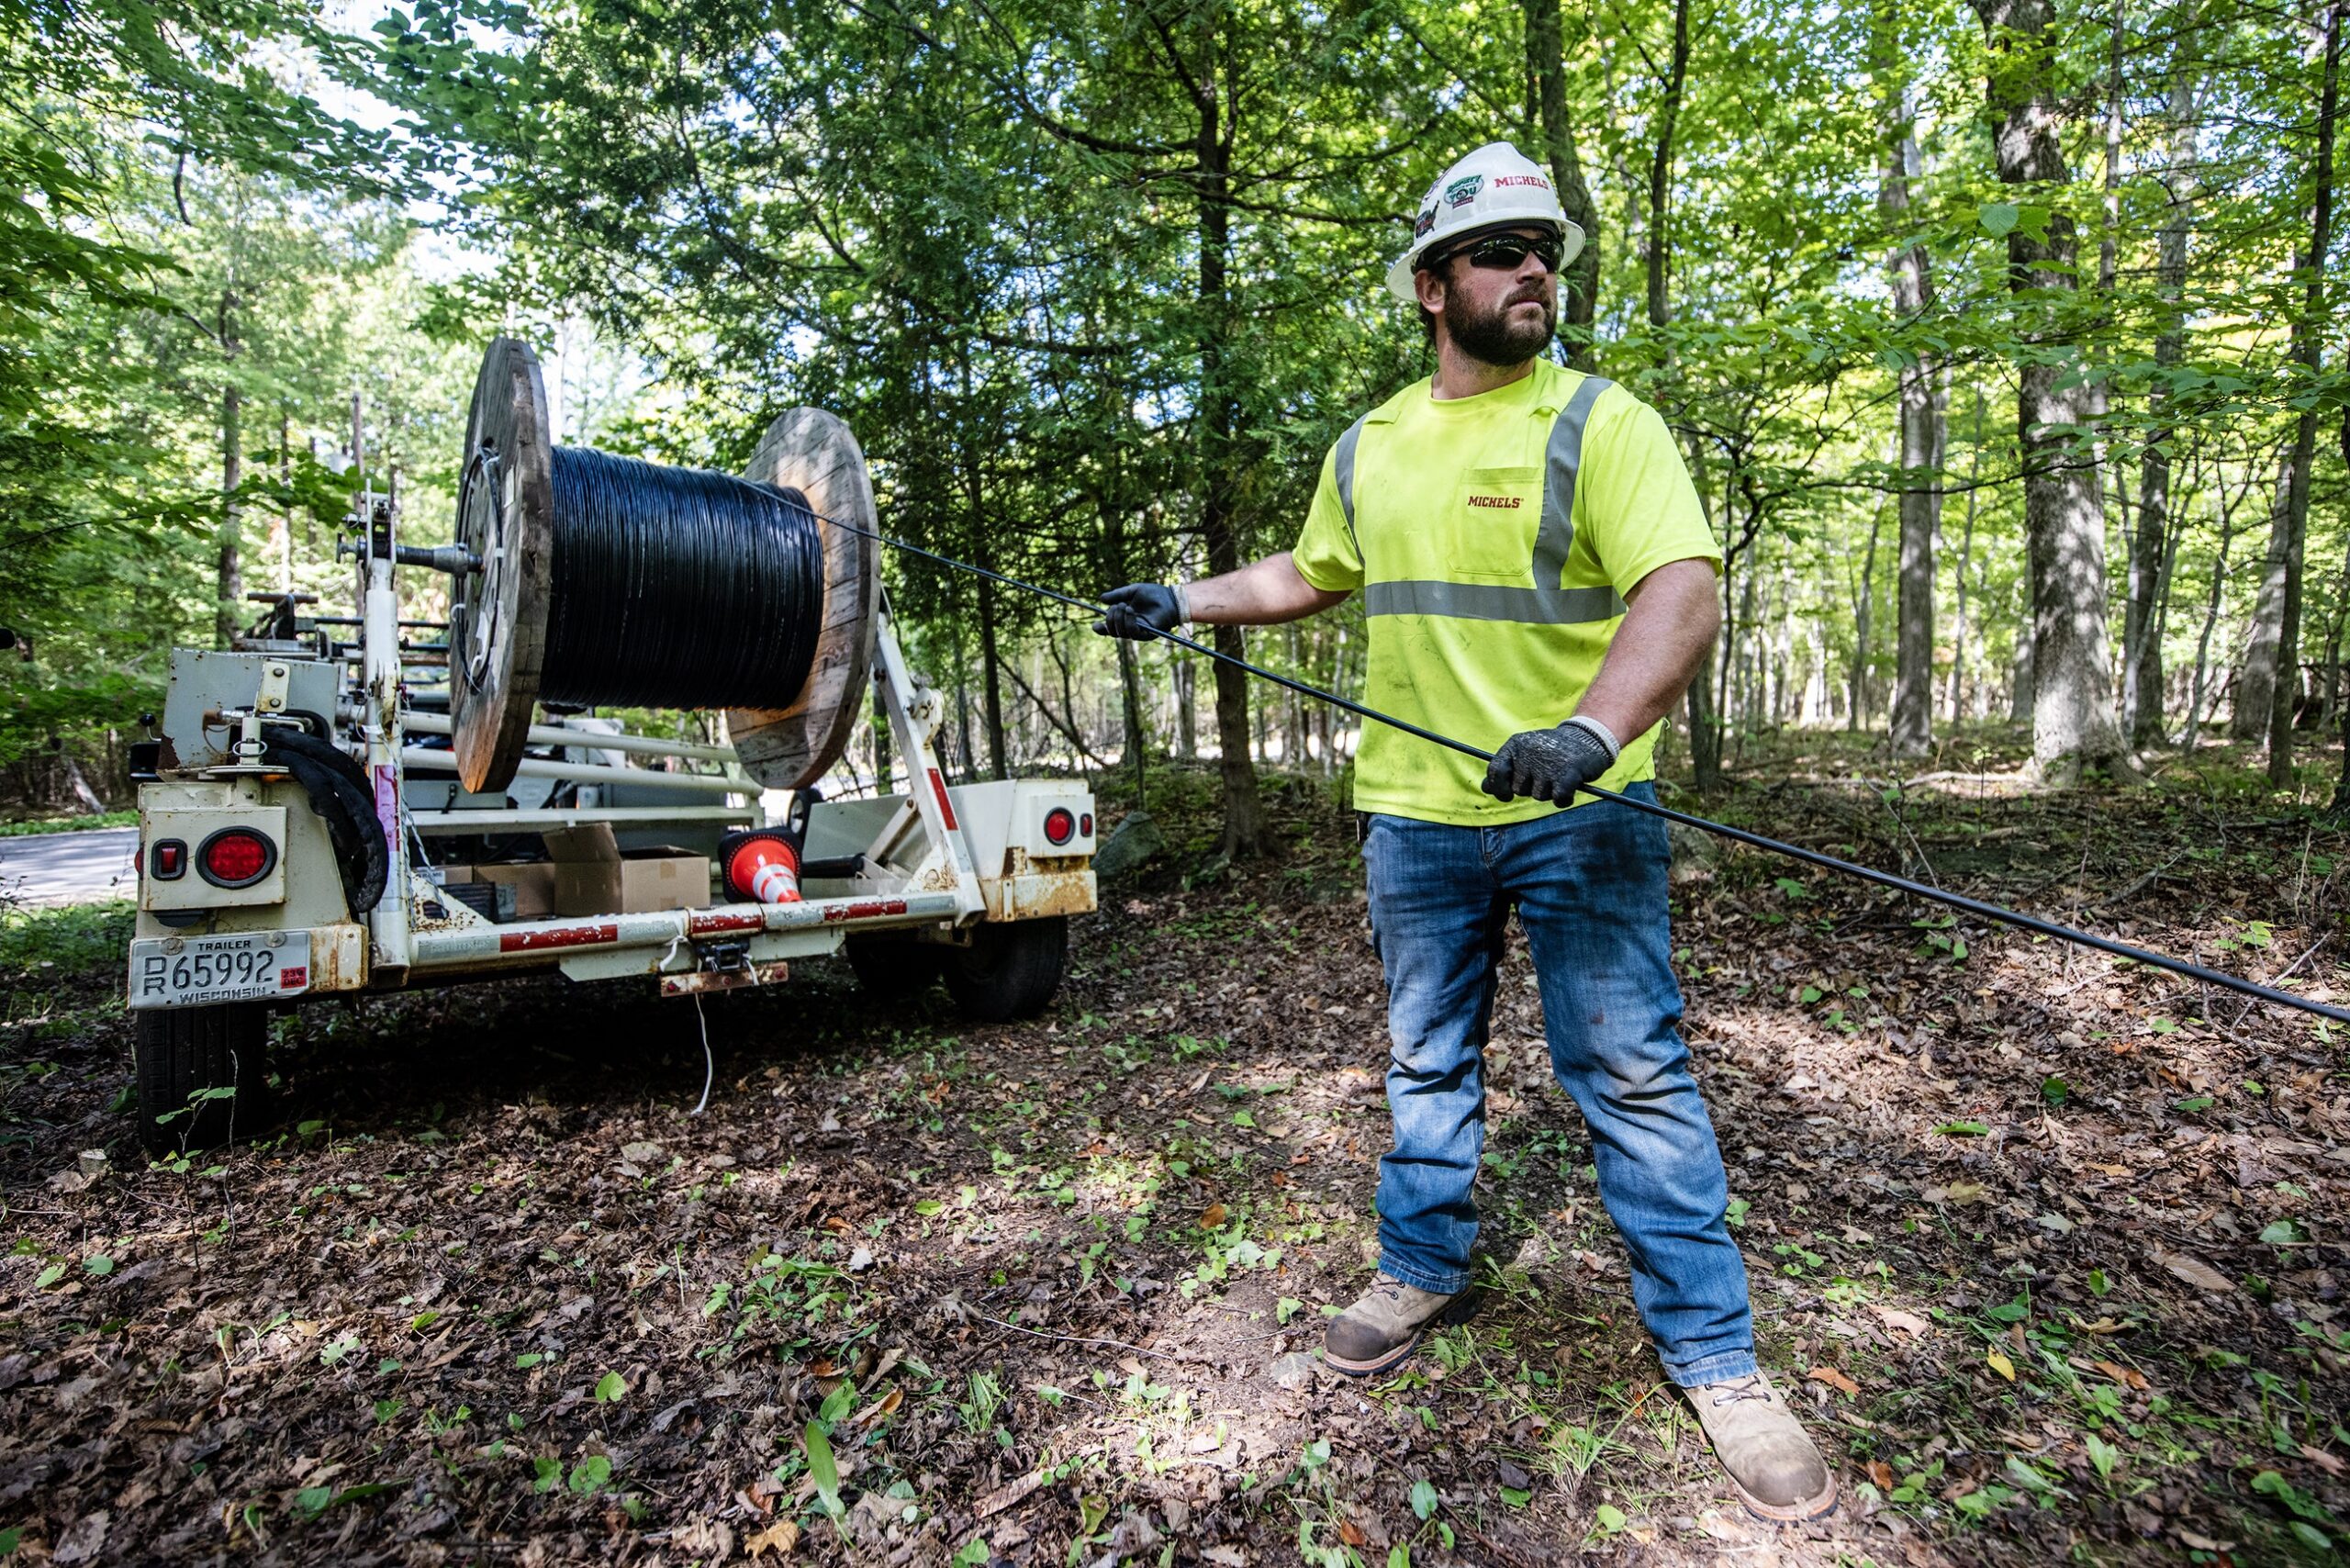 A worker in neon yellow stands in a wooded area as he pulls a black cable from a large spool.